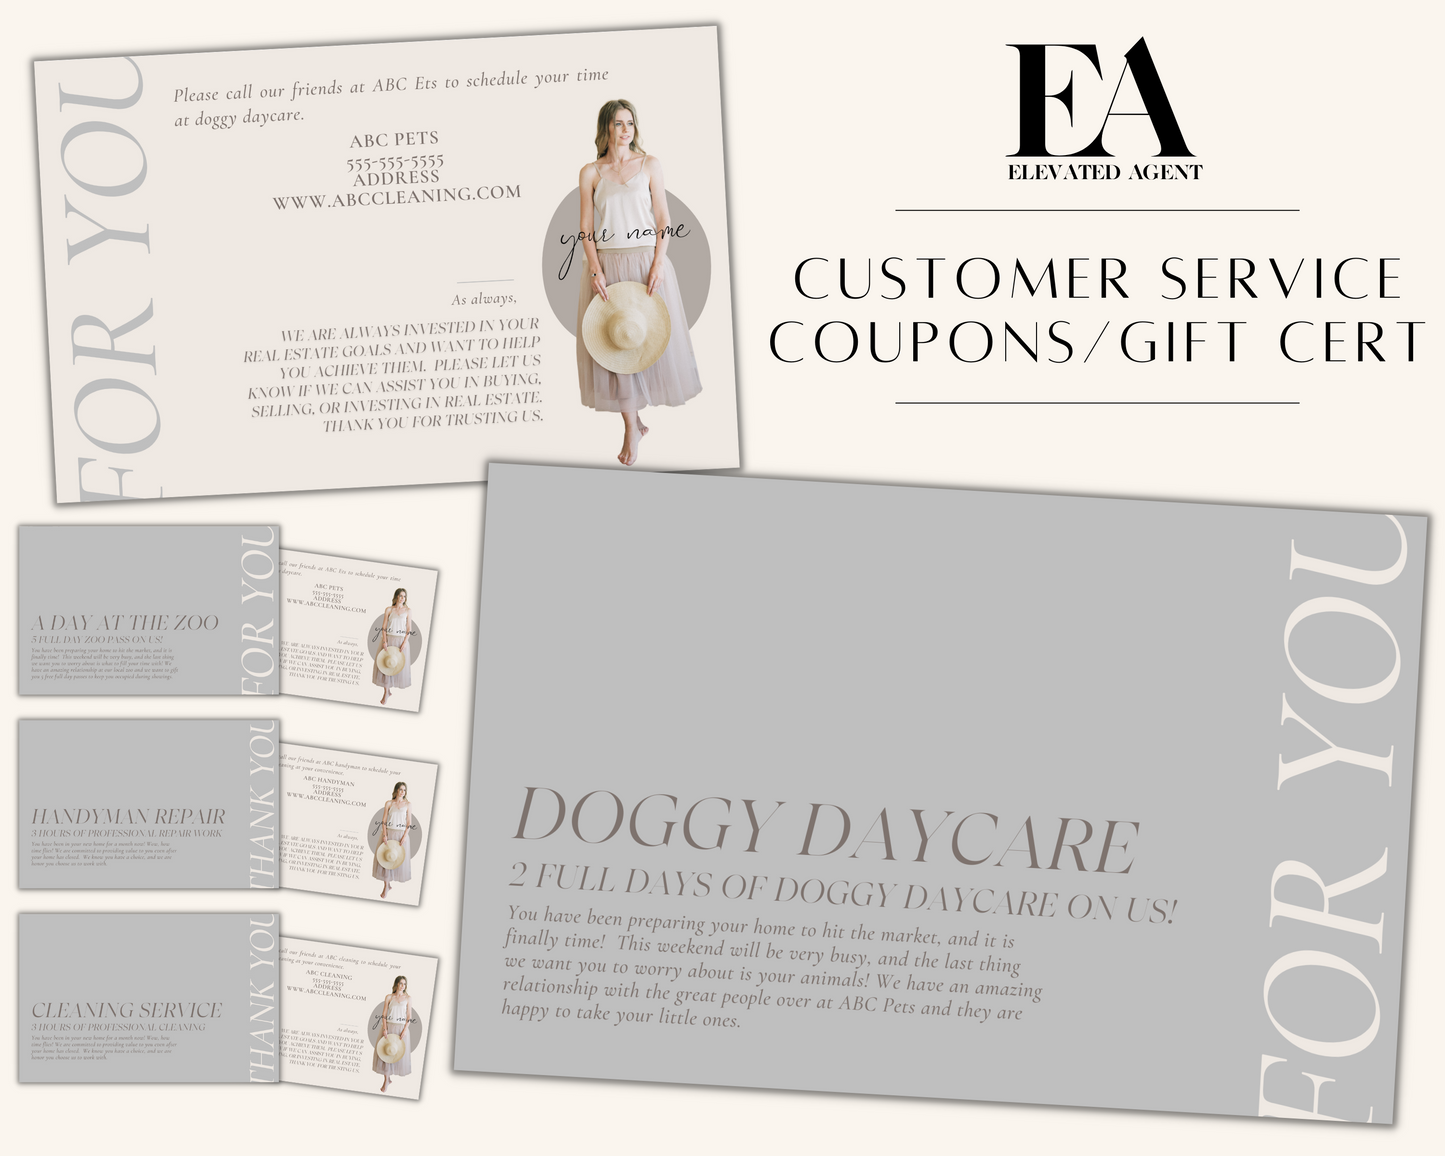 Customer Service Coupons